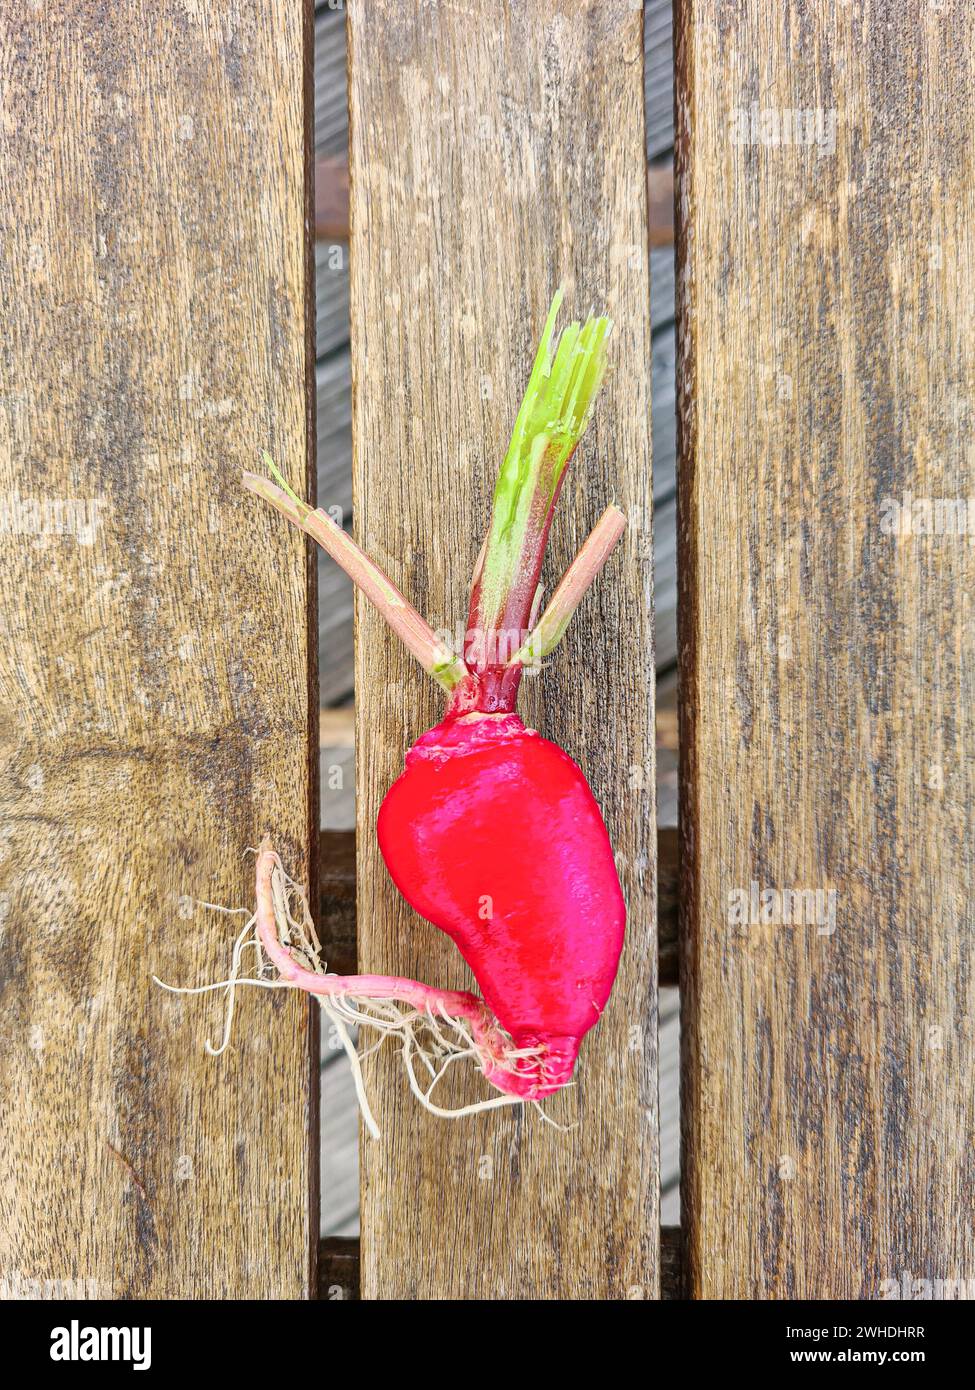 Close-up of a red radish with roots on a wooden table Stock Photo